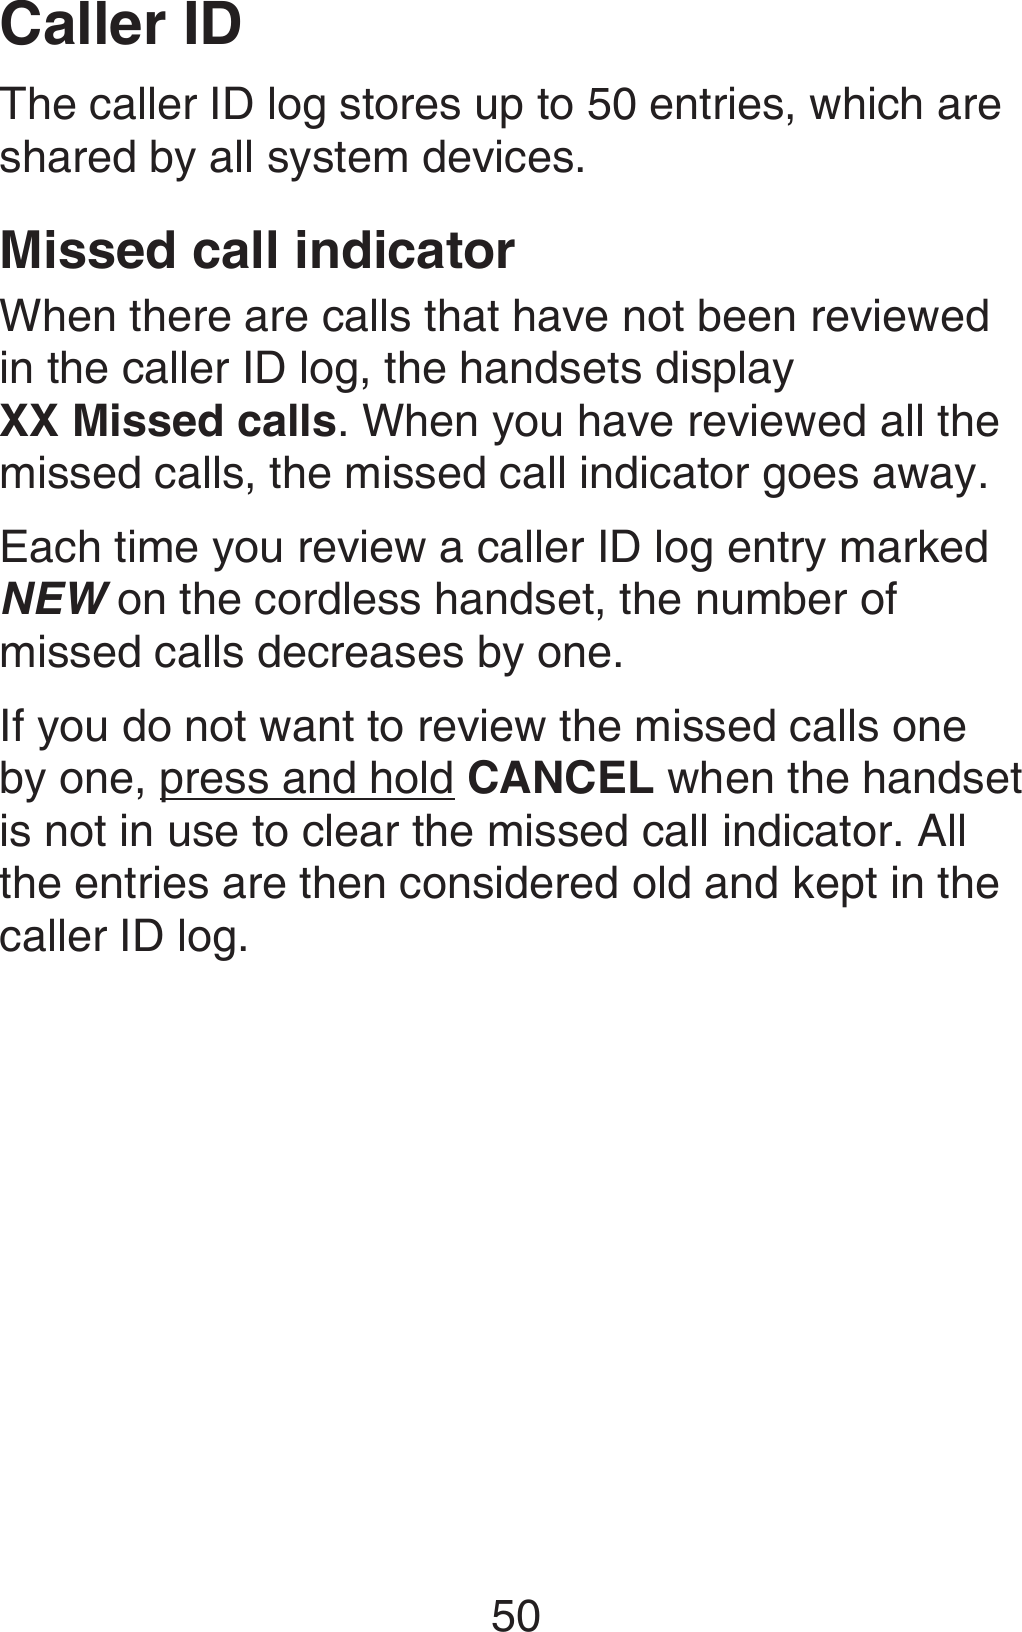 50The caller ID log stores up to 50 entries, which are shared by all system devices.Missed call indicatorWhen there are calls that have not been reviewed in the caller ID log, the handsets display  XX Missed calls. When you have reviewed all the missed calls, the missed call indicator goes away.Each time you review a caller ID log entry marked NEW on the cordless handset, the number of missed calls decreases by one.If you do not want to review the missed calls one by one, press and hold CANCEL when the handset is not in use to clear the missed call indicator. All the entries are then considered old and kept in the caller ID log.Caller ID